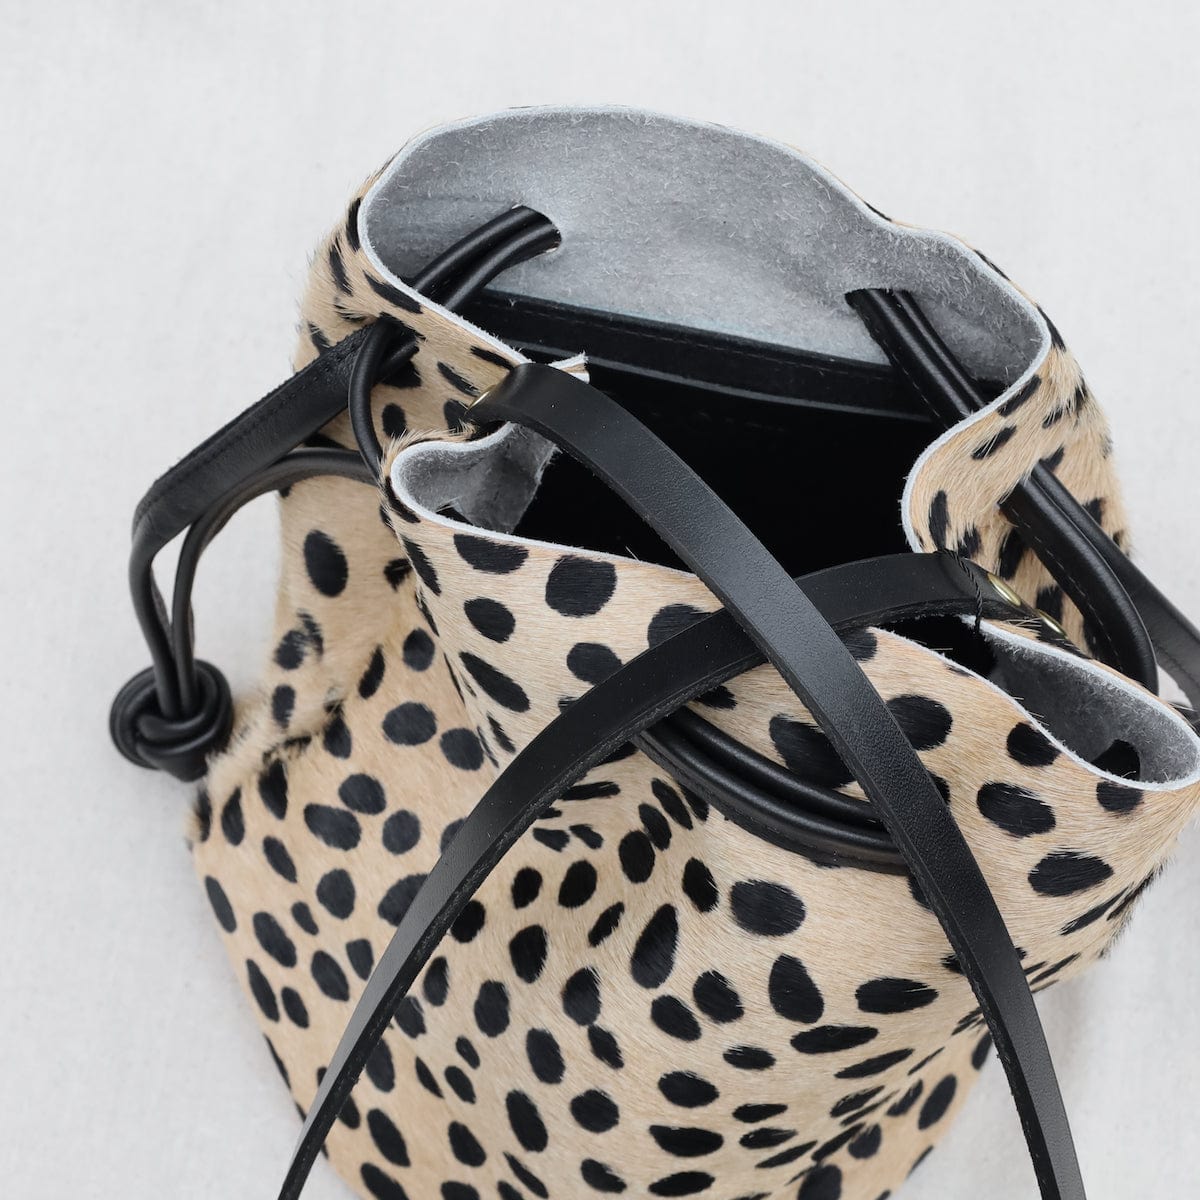 BAG The Ana Bucket in Cheetah with Black